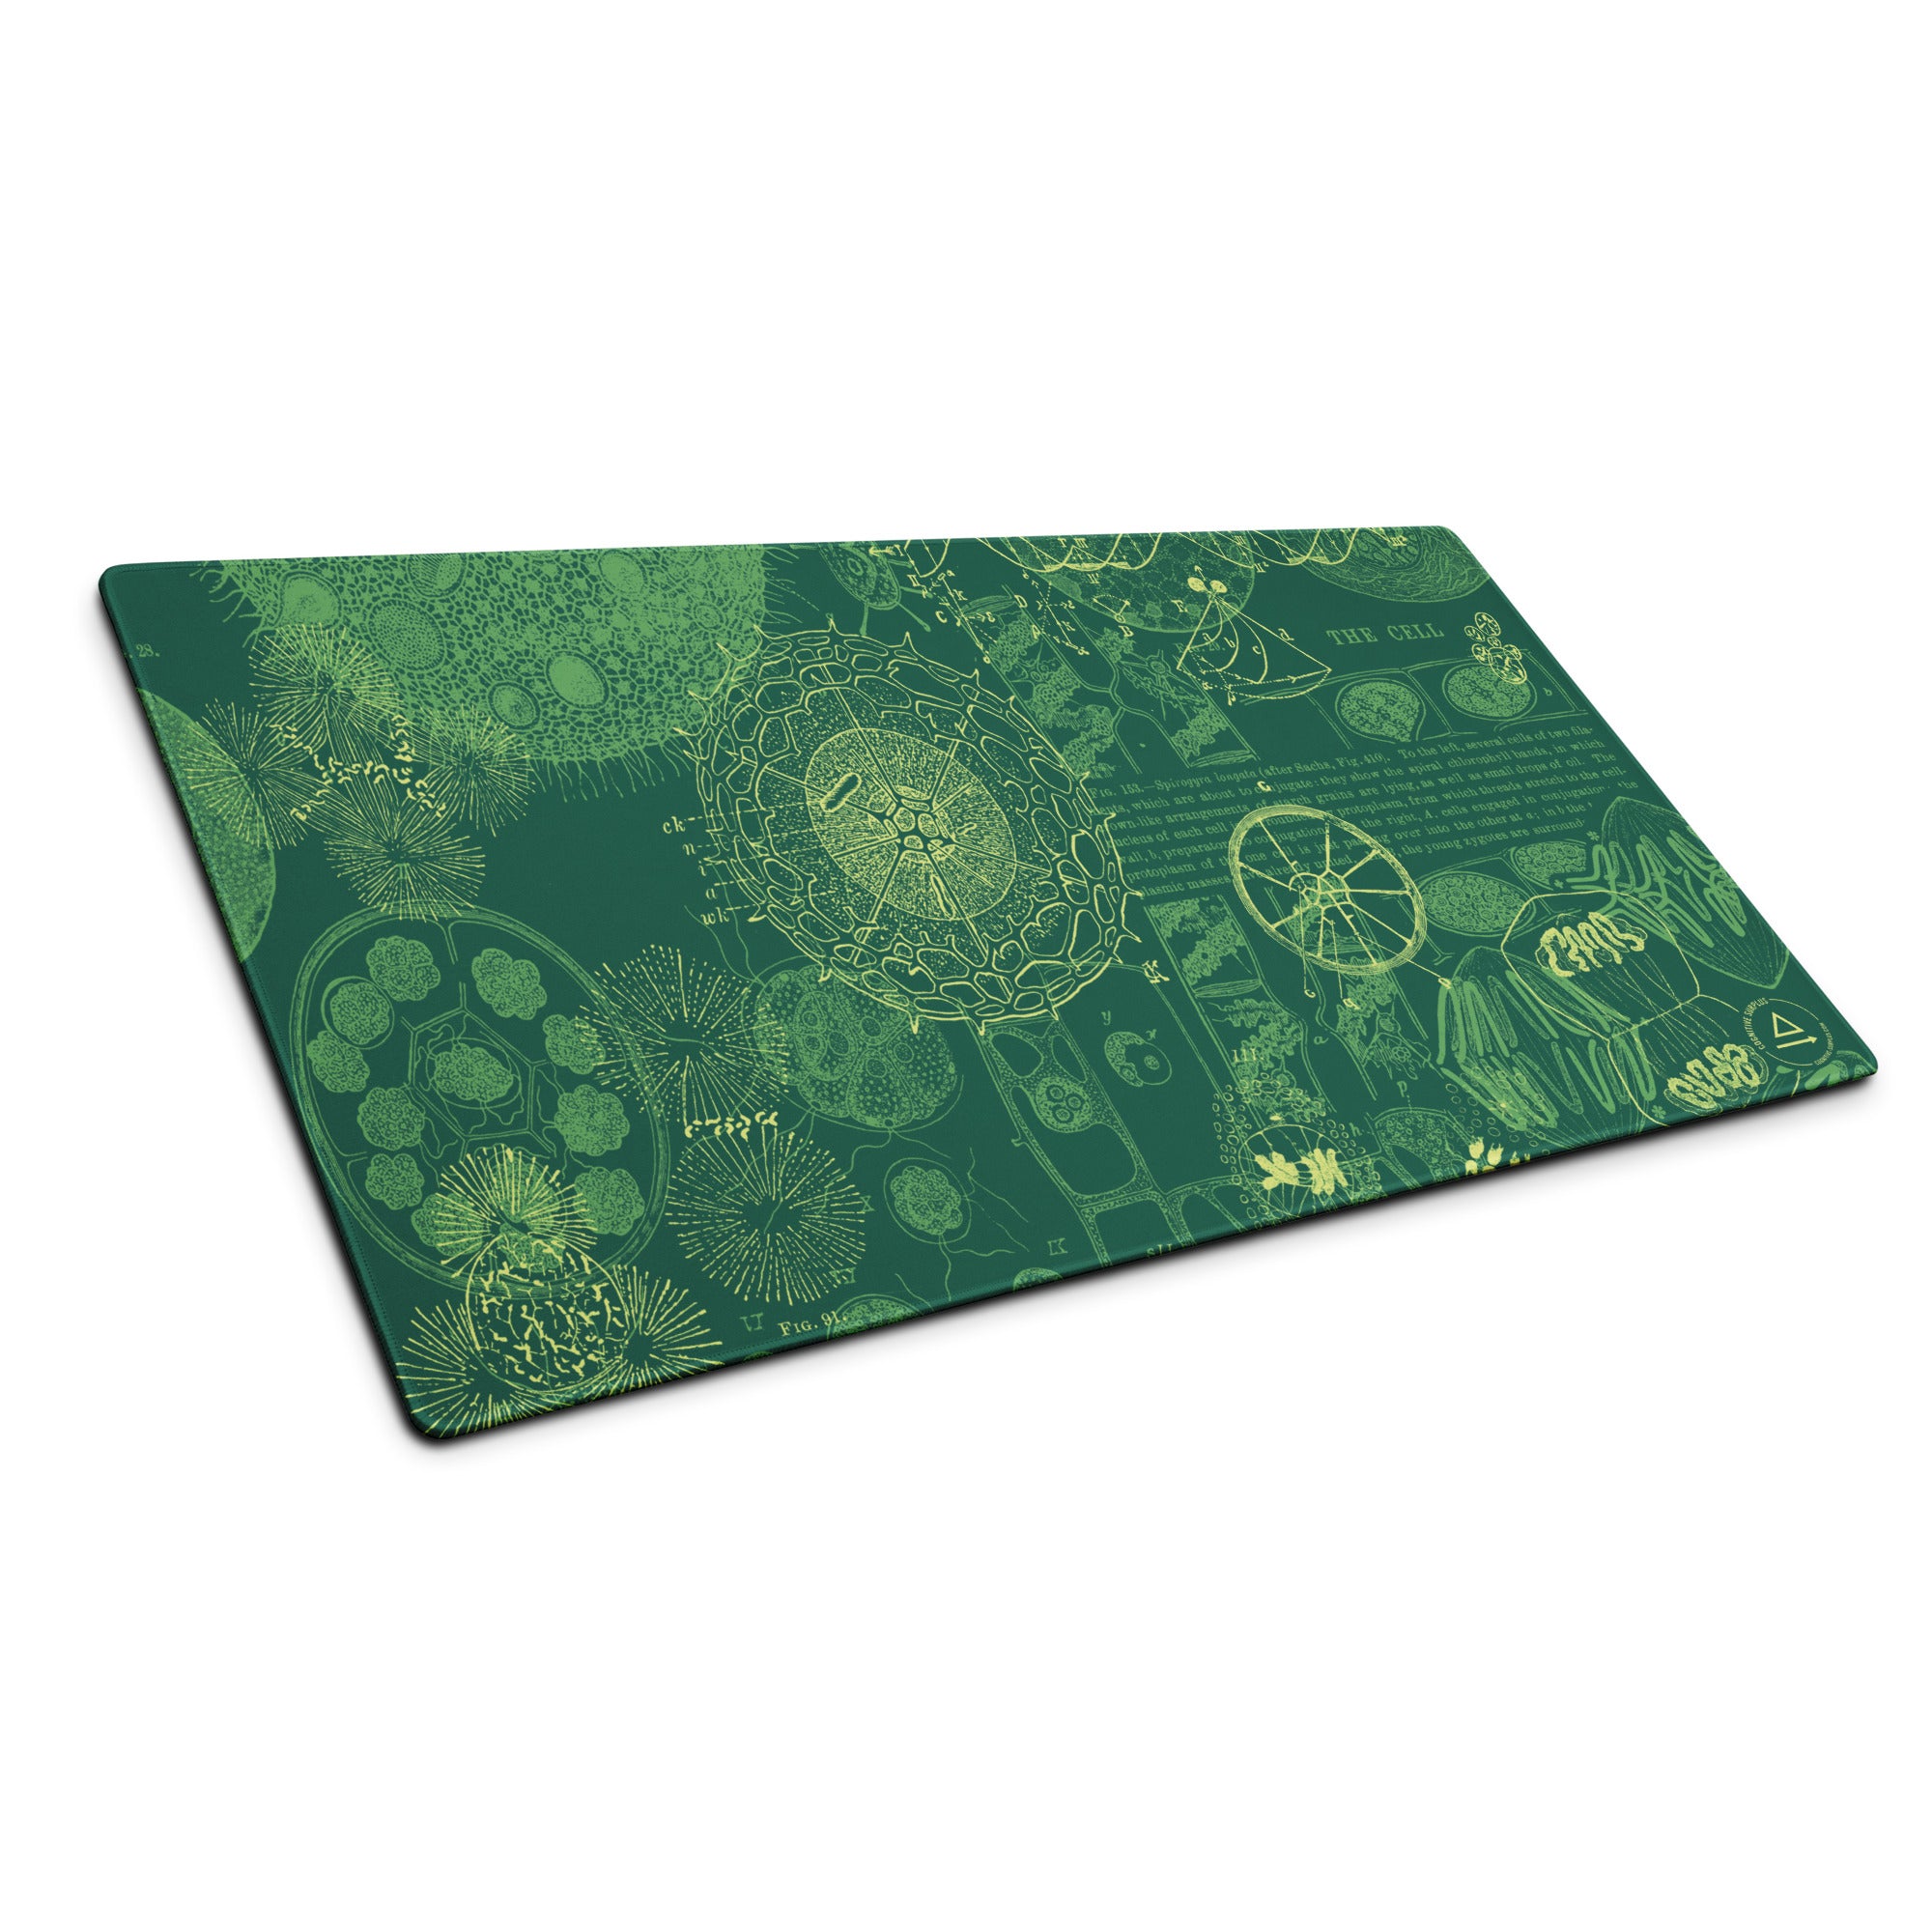 gaming-mouse-pad-white-36x18-front-6572228e4410b.jpg